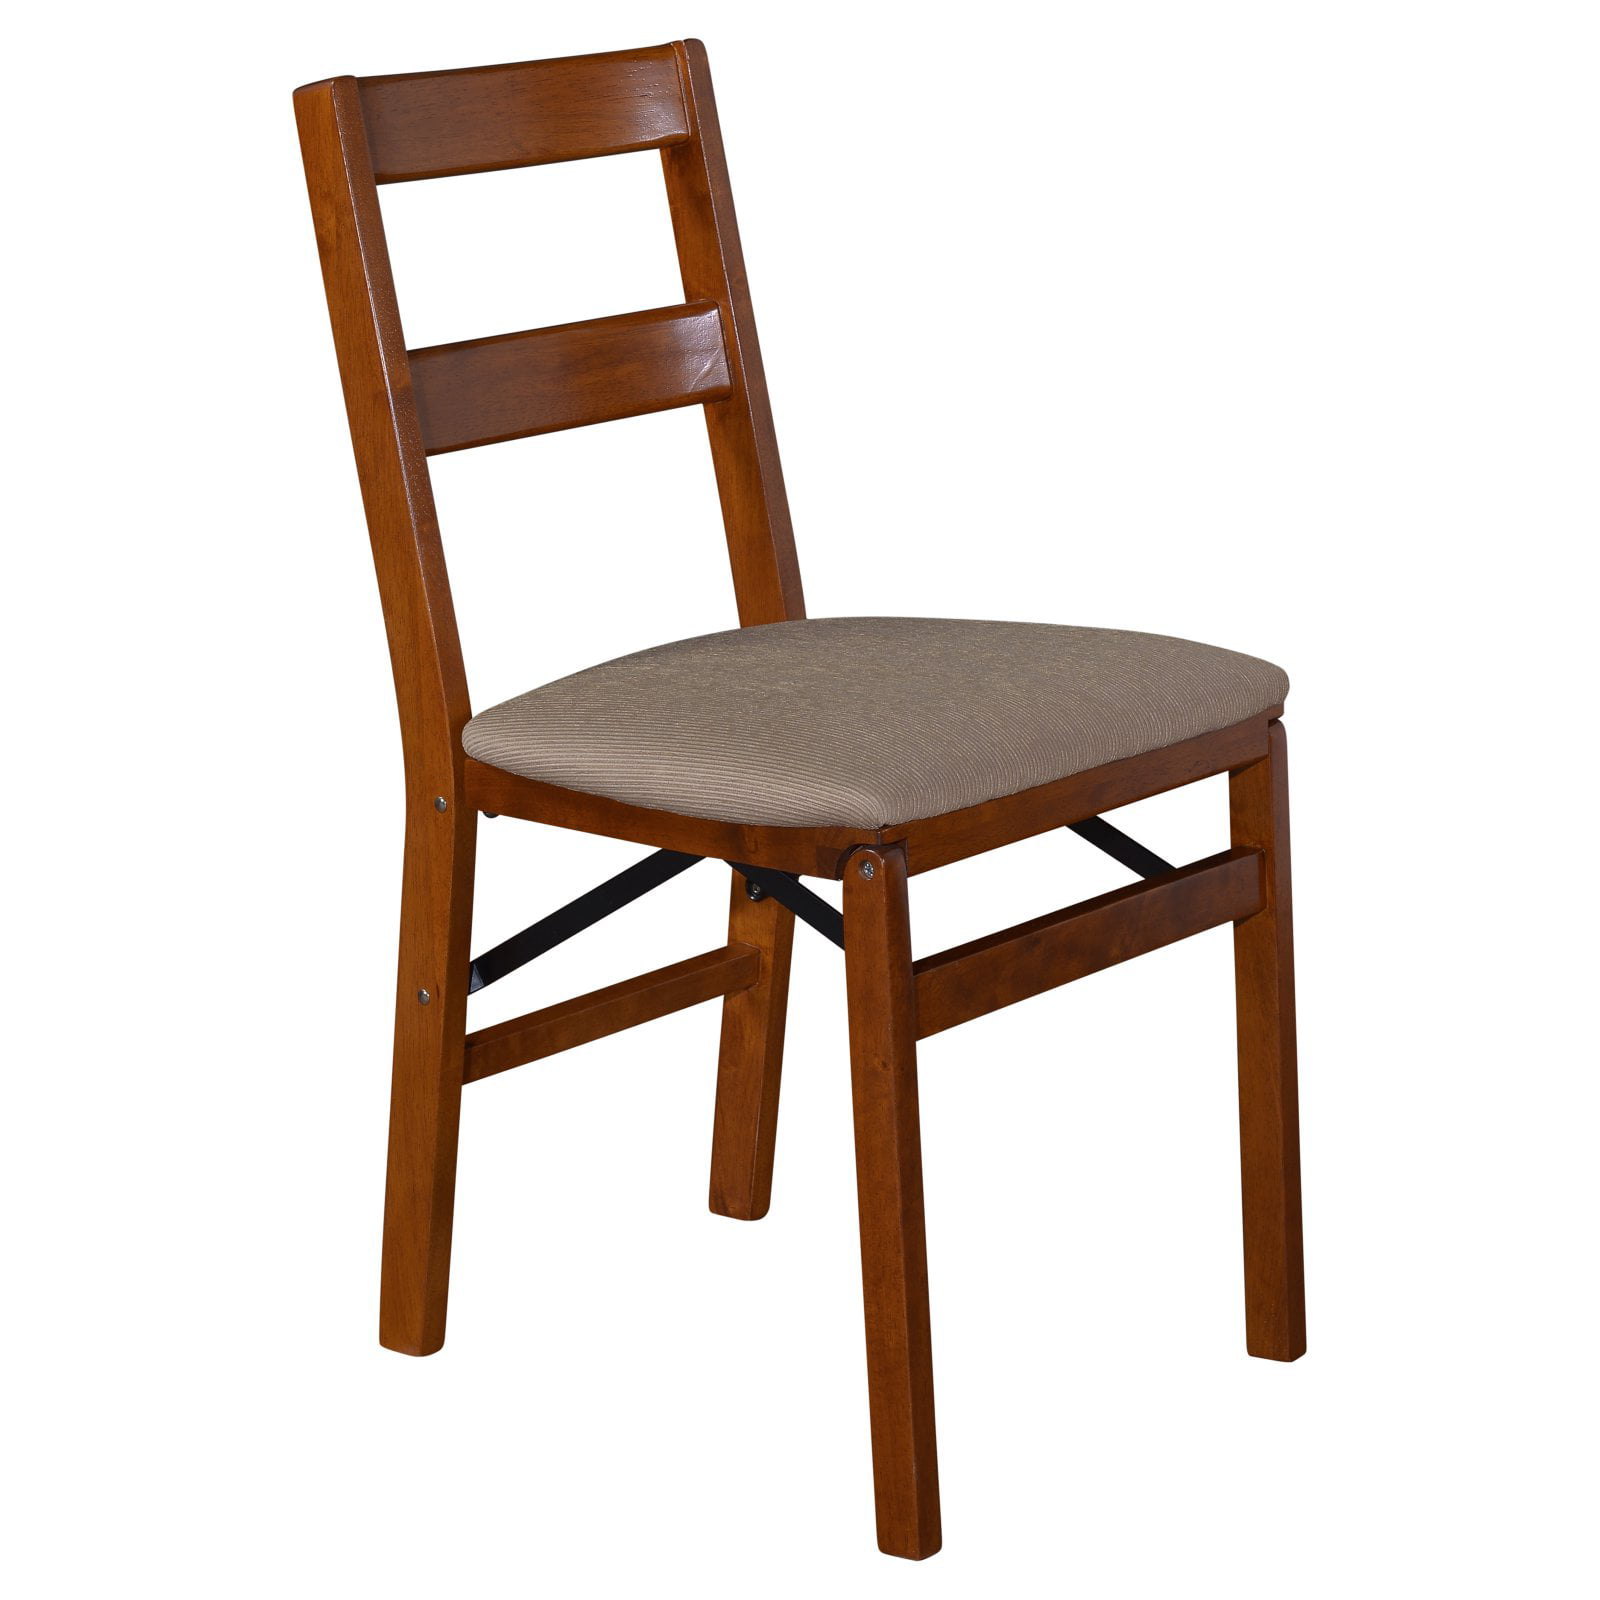 Classic Slat Back Folding chair in Fruitwood and Colton upholstery